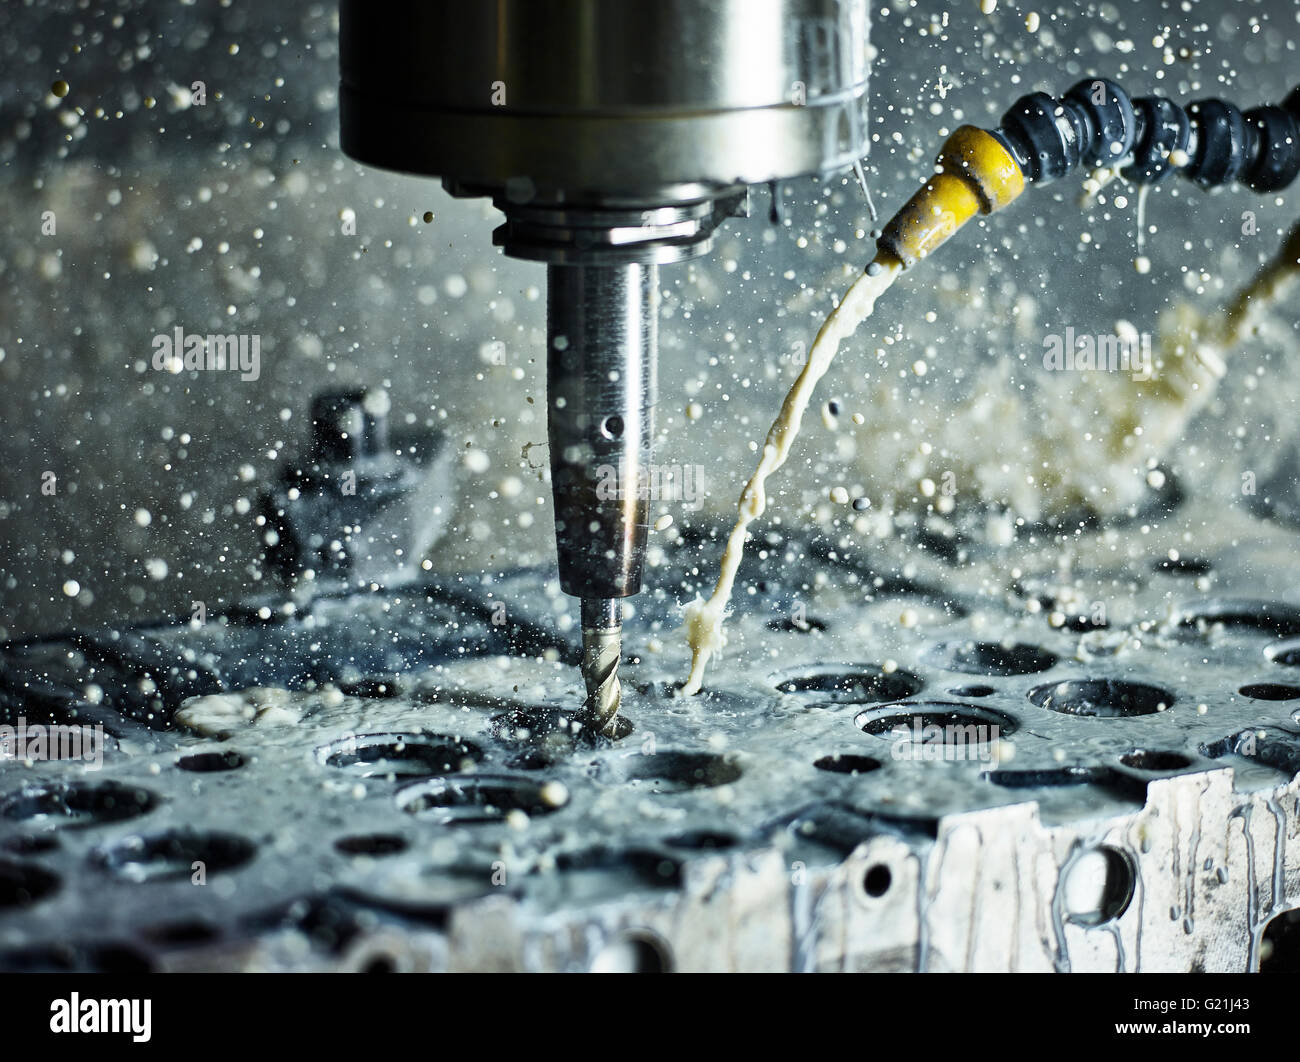 CNC machine, CNS milling machine drilling the valve opening in a cylinder head, cooled by liquid, Austria, Europe Stock Photo